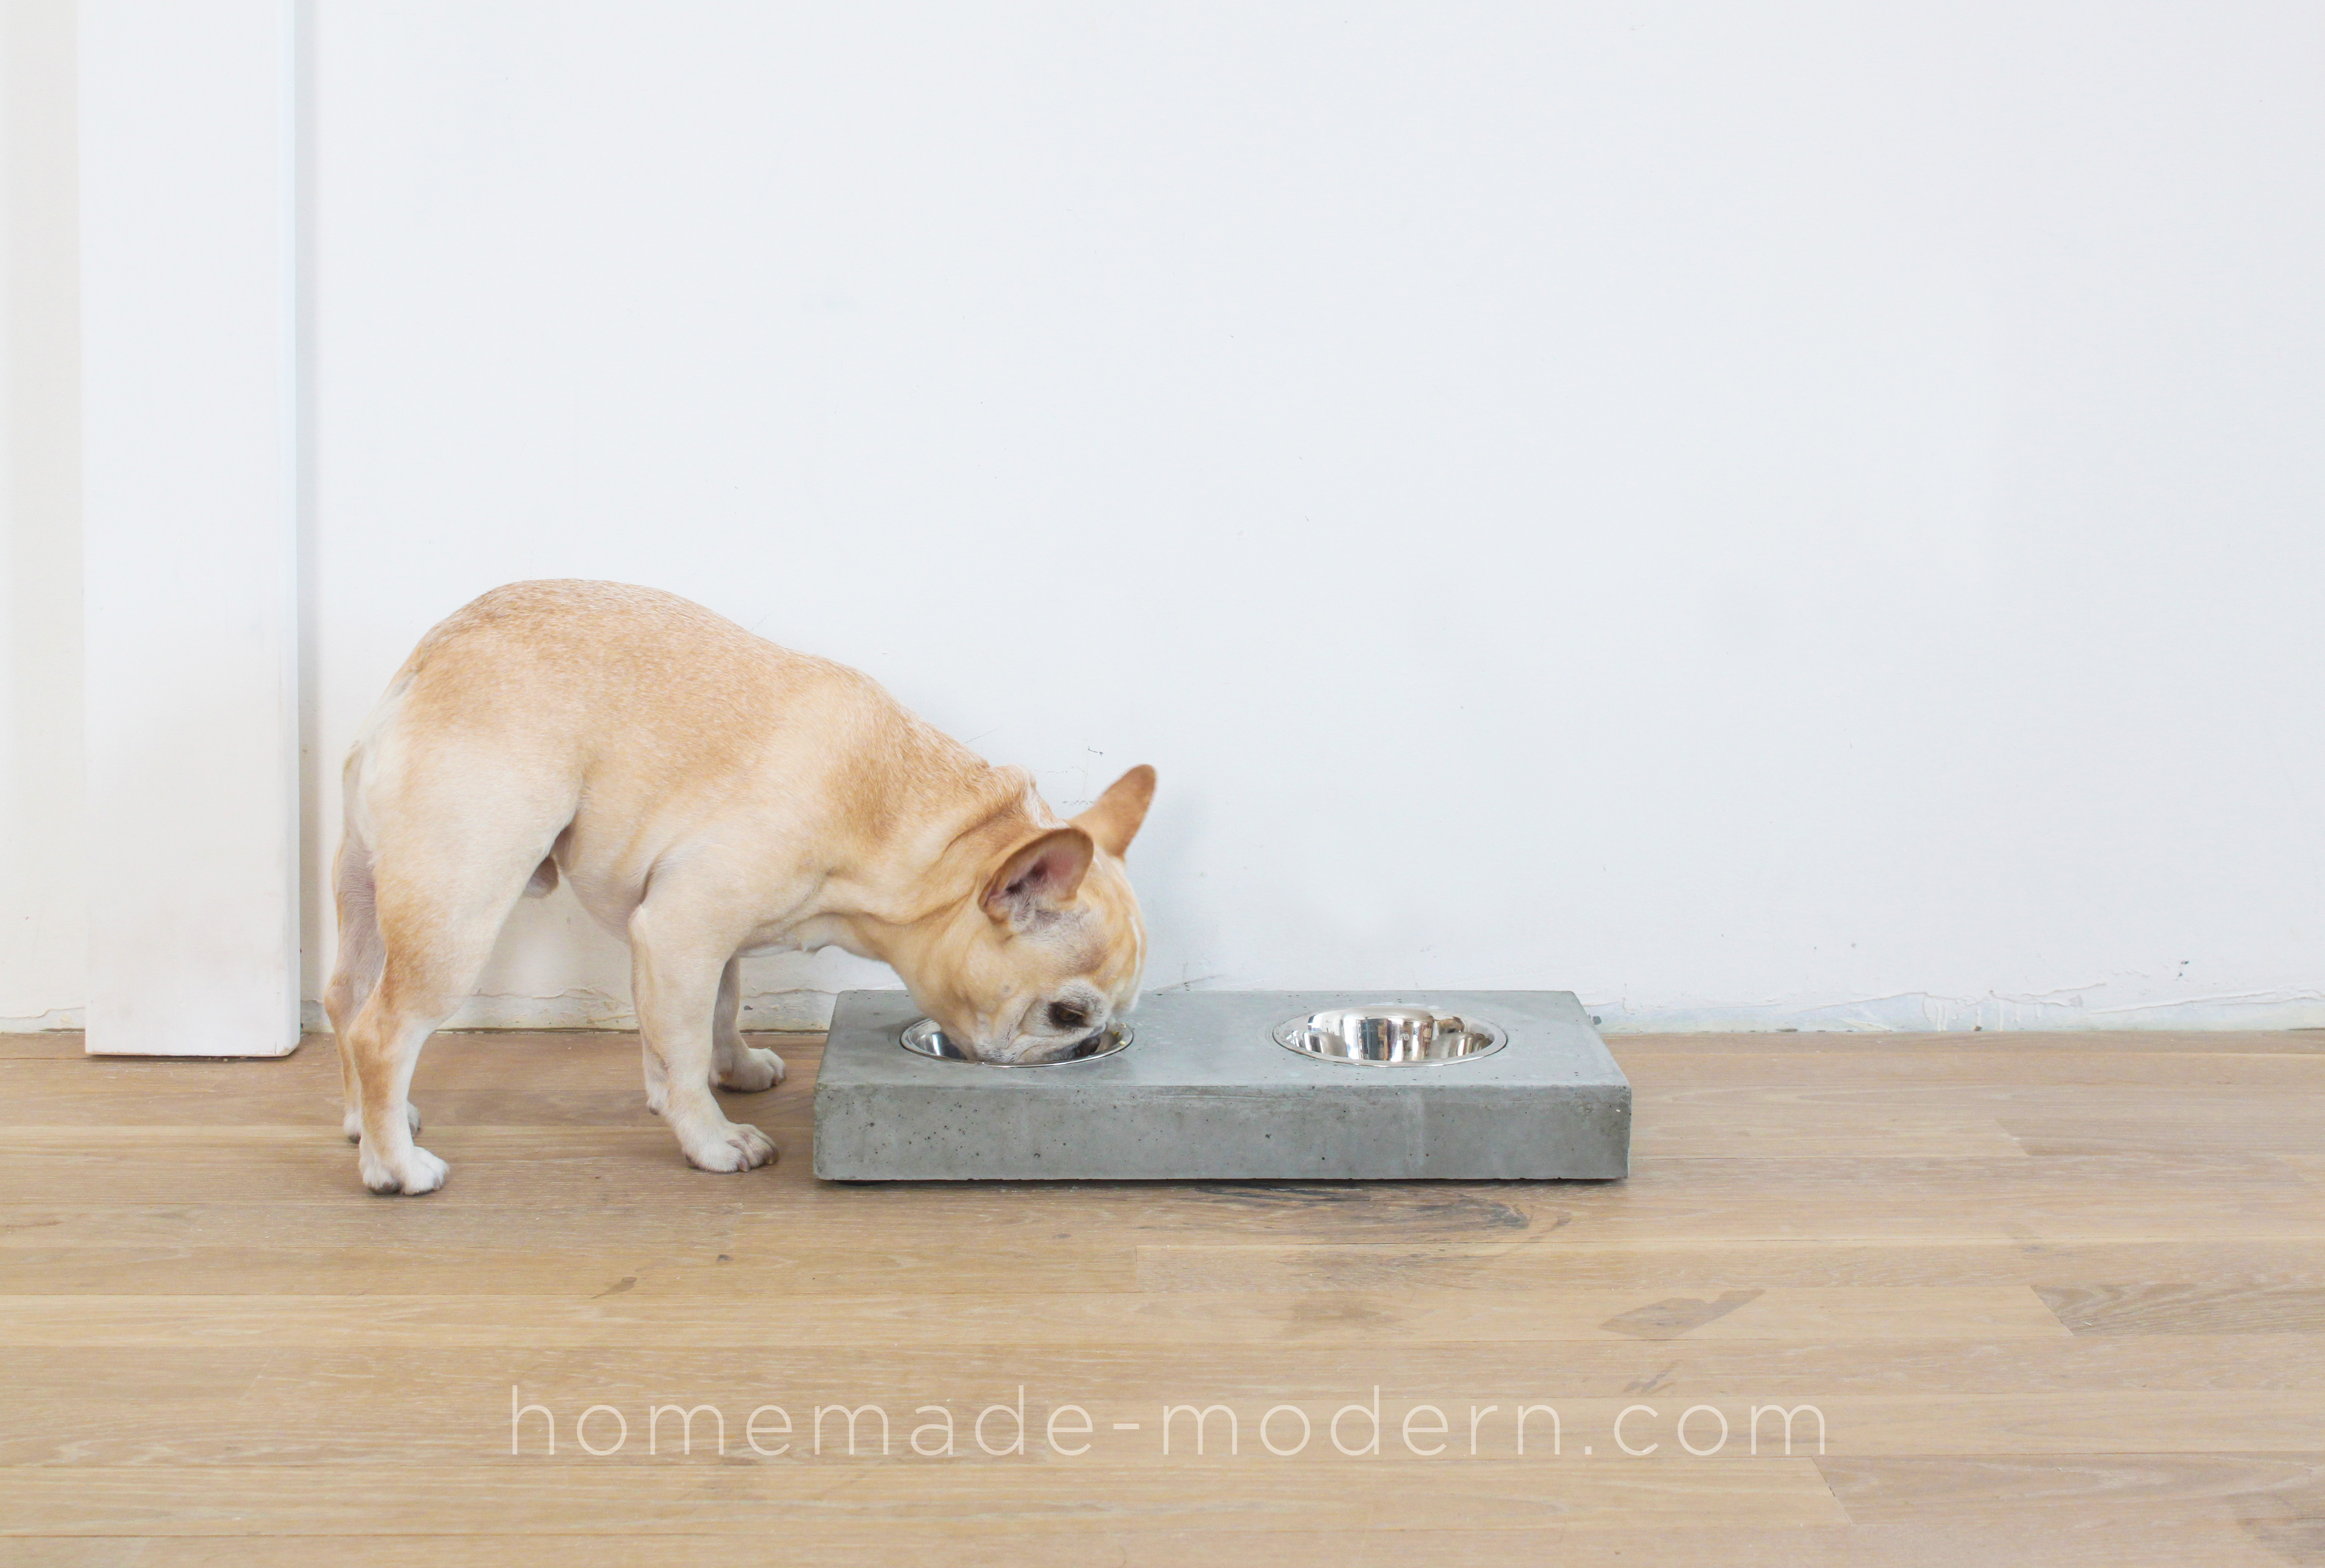 This DIY concrete dog dish station was made out of Quikrete 5000 concrete mix from Home Depot. Full instructions can be found at HomeMade-Modern.com